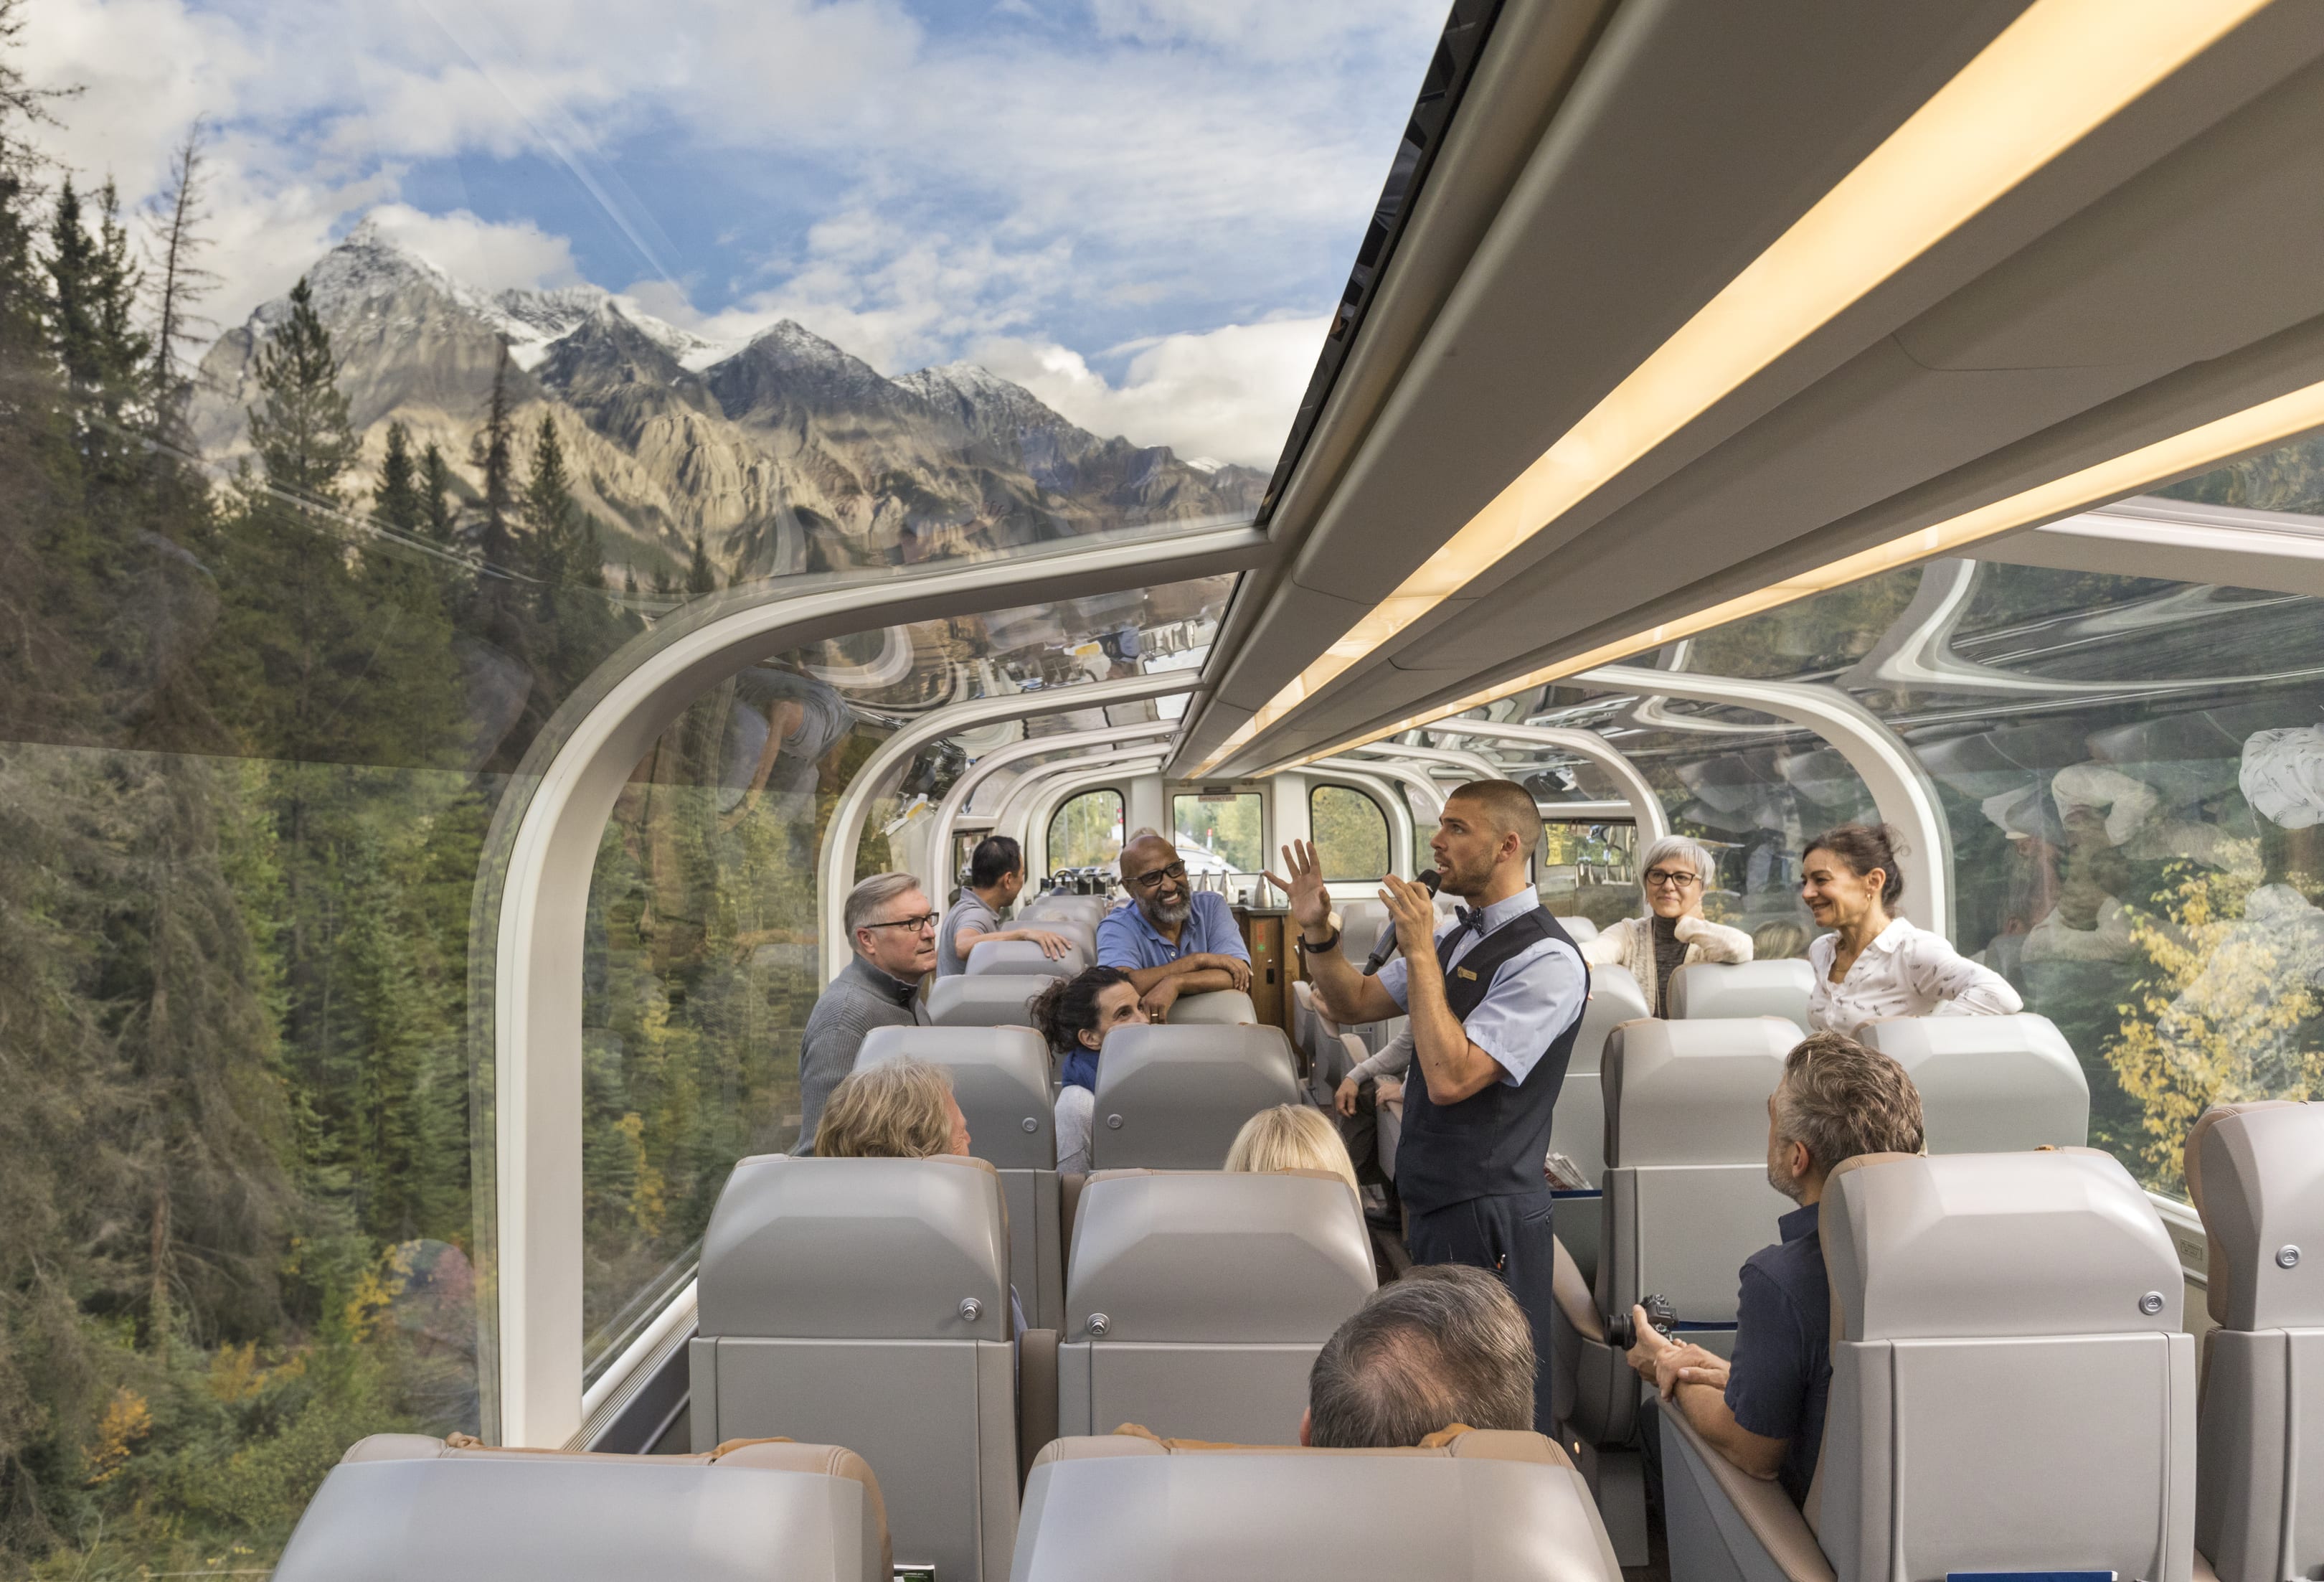 The Rocky Mountaineer is one of Canada’s most spectacular train rides.